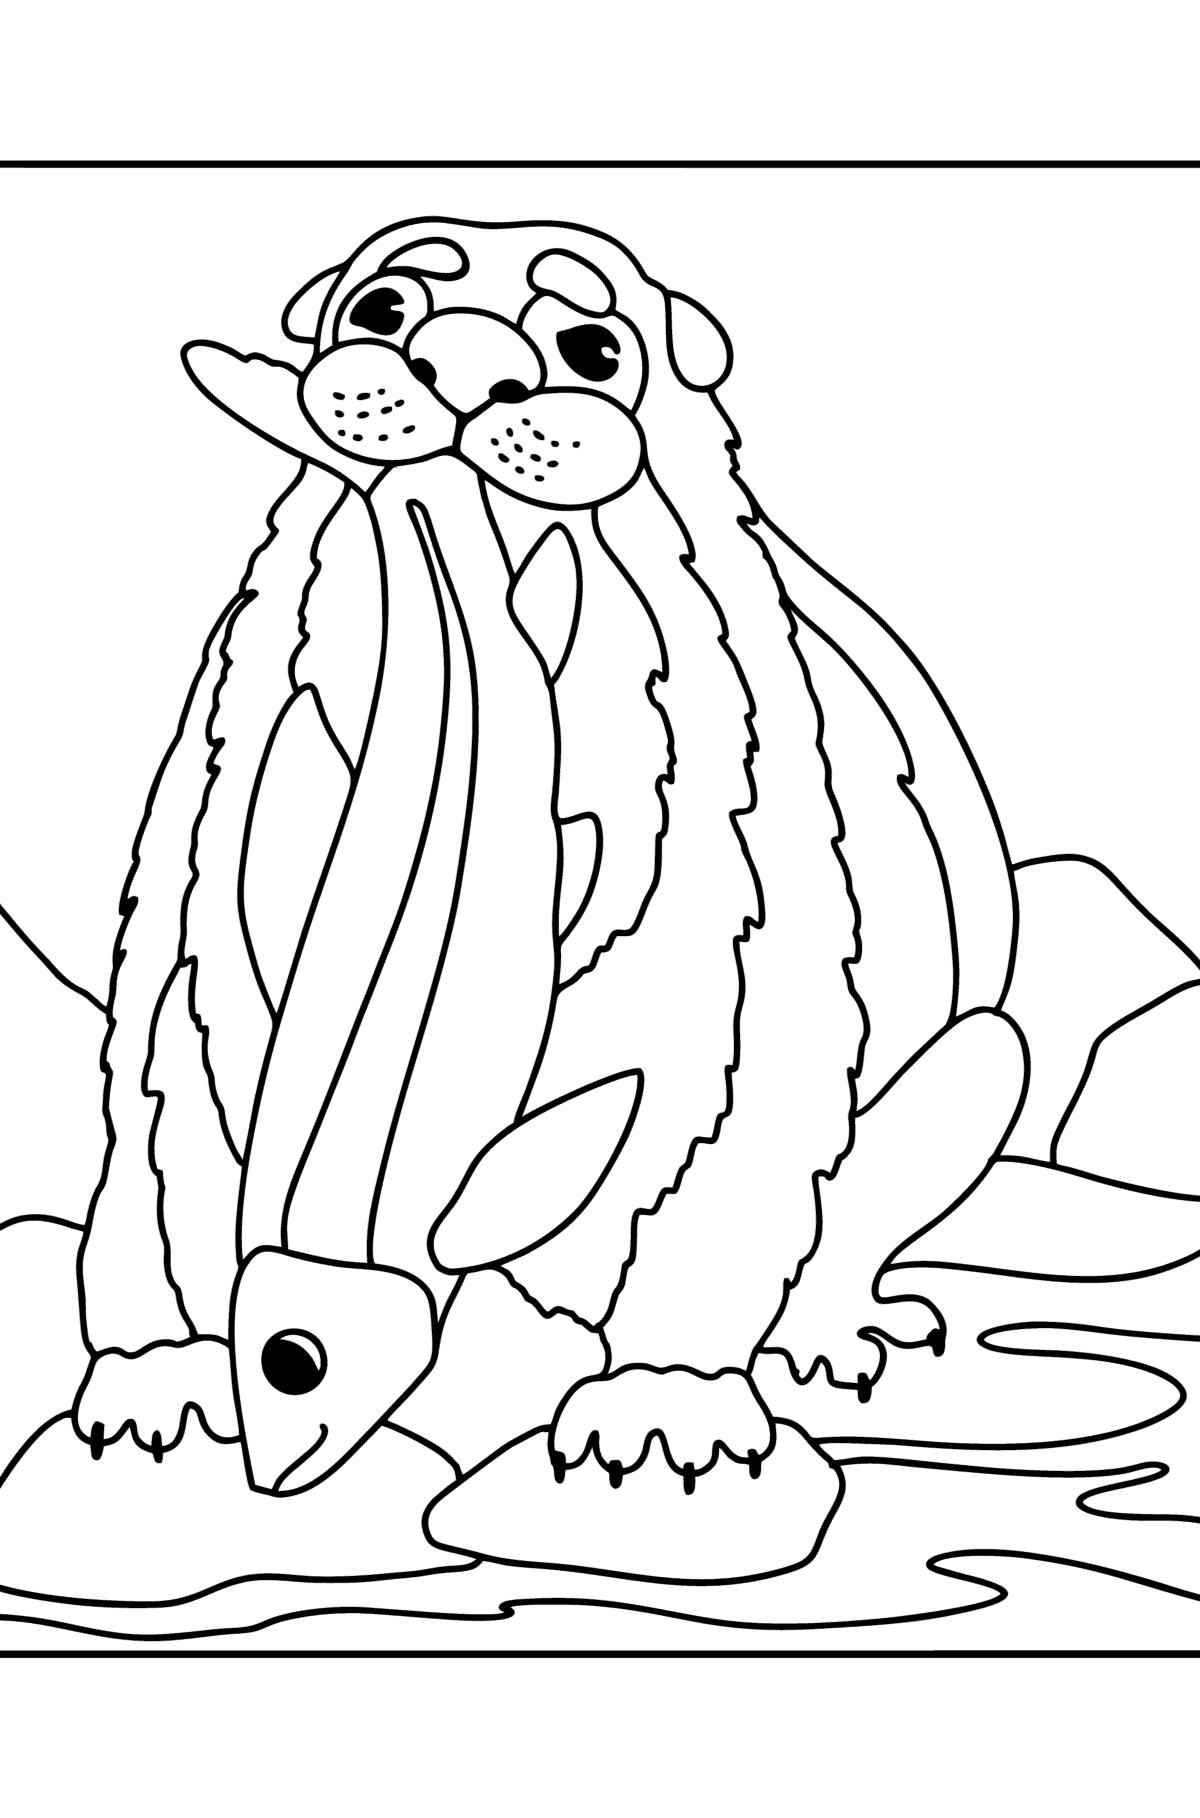 Sea Otter coloring page - Coloring Pages for Kids